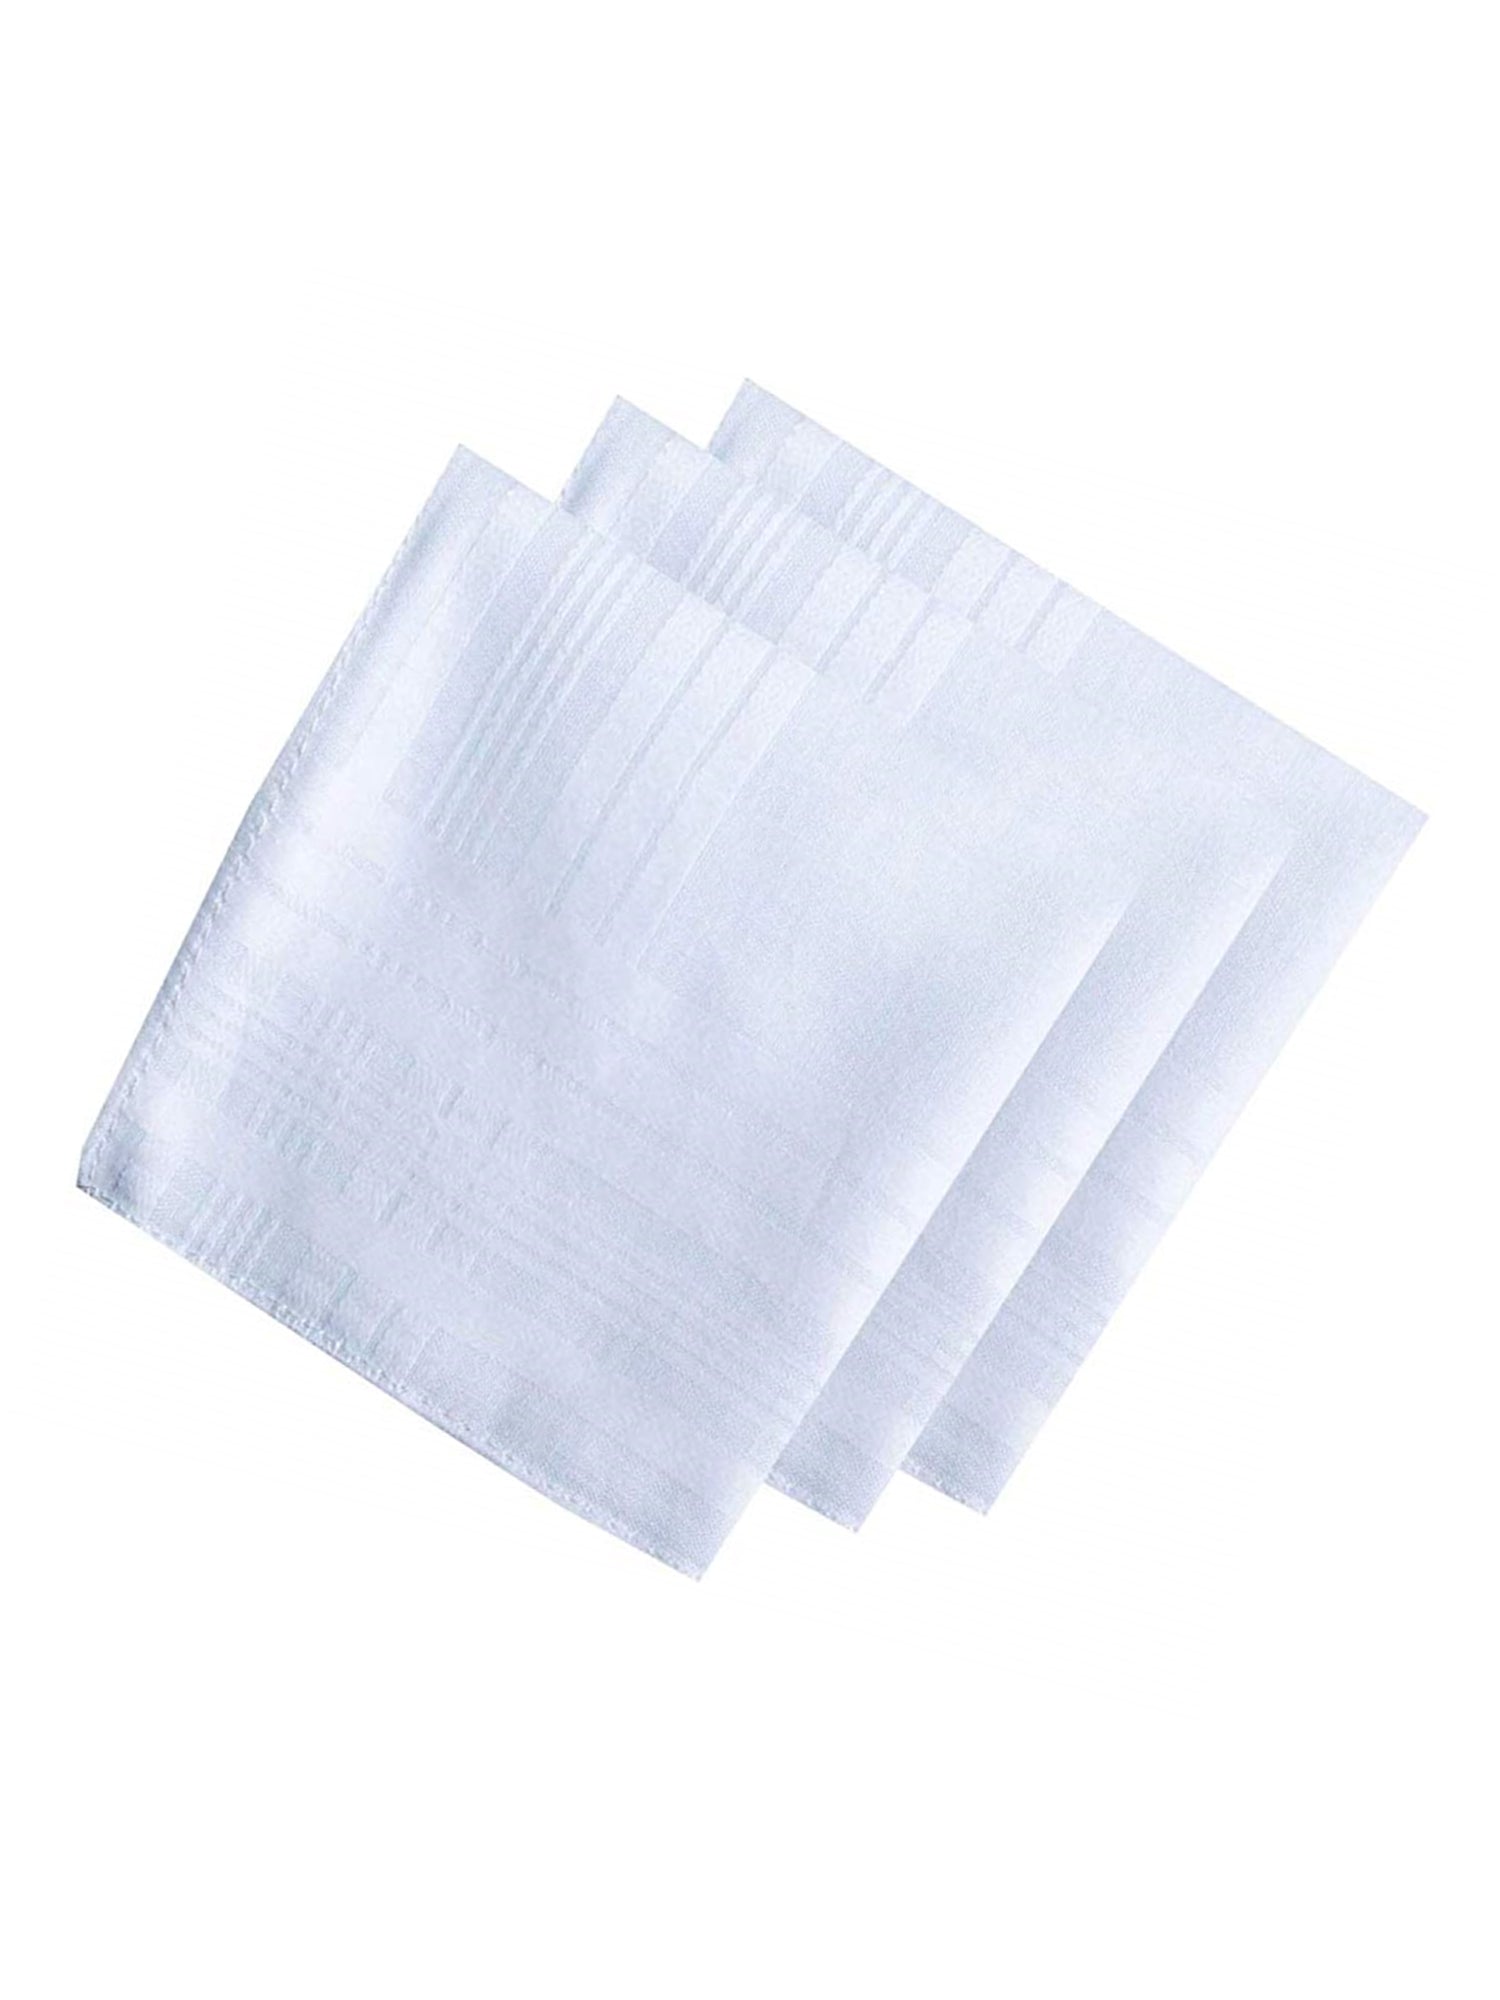 Men's Formal White 65% Polyester 35% Cotton Extra Soft Finish Handkerchief Prefolded Pocket Squares HAVE-A-HANK 3 Pieces - White Regular 